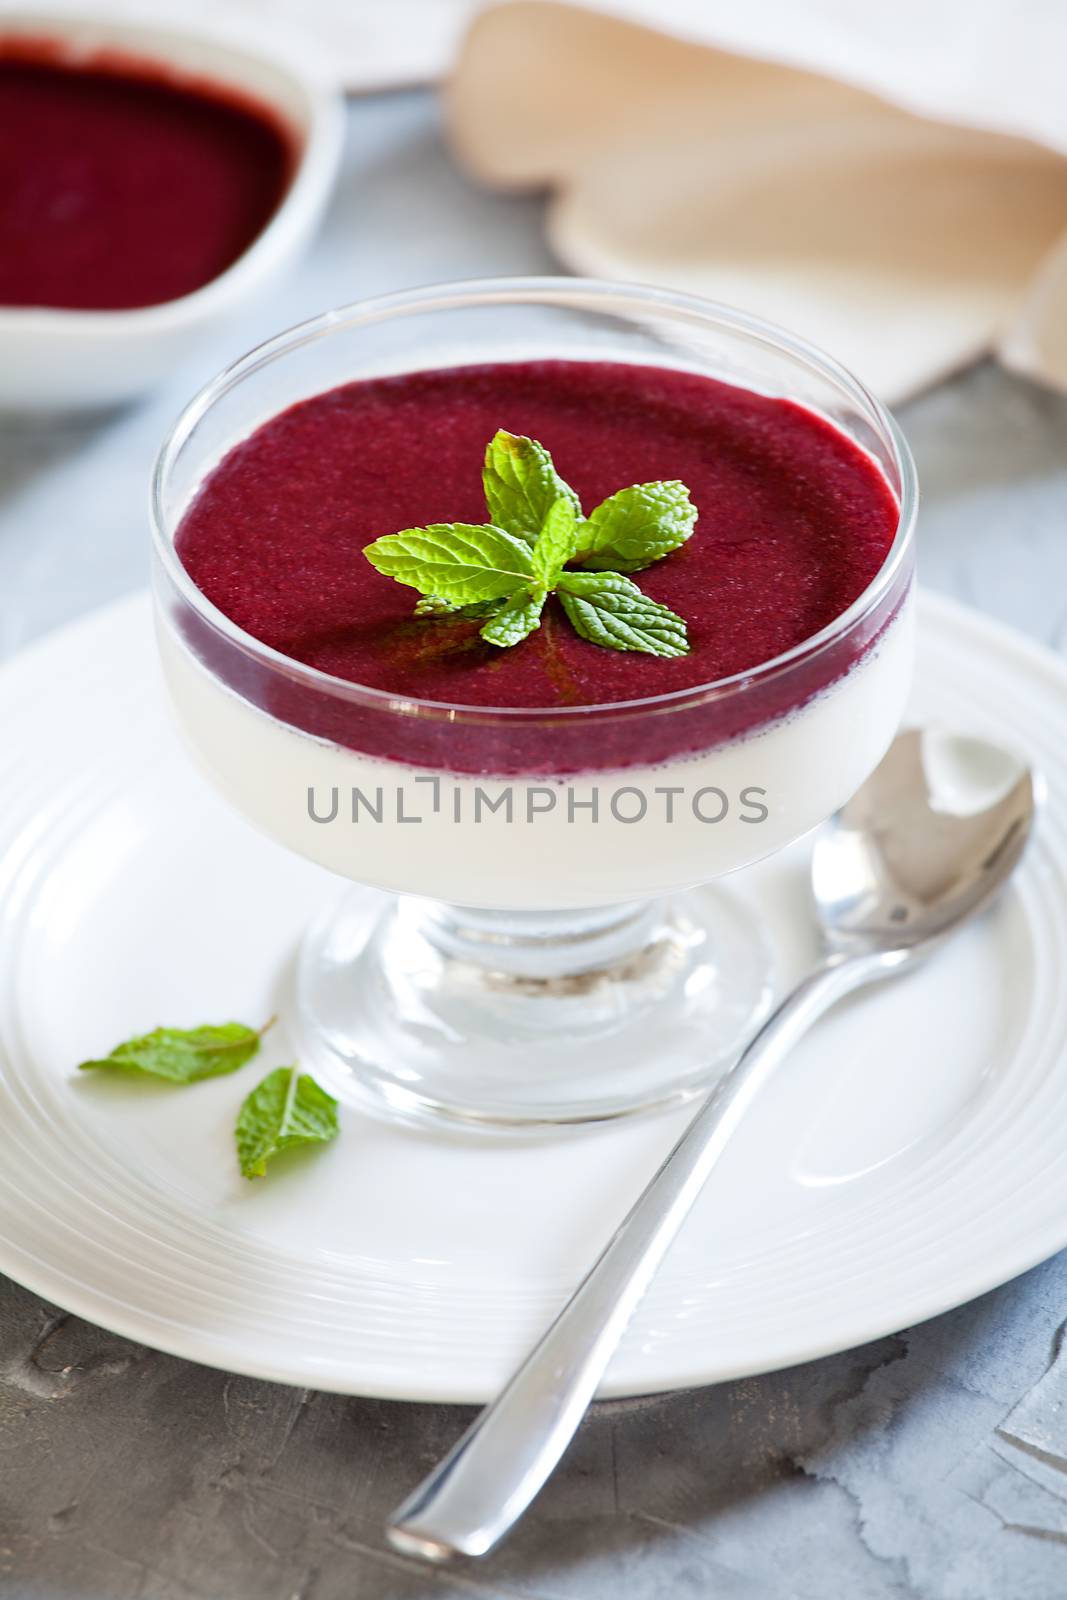 Homemade Panna Cotta With Cherry Topping by mpessaris